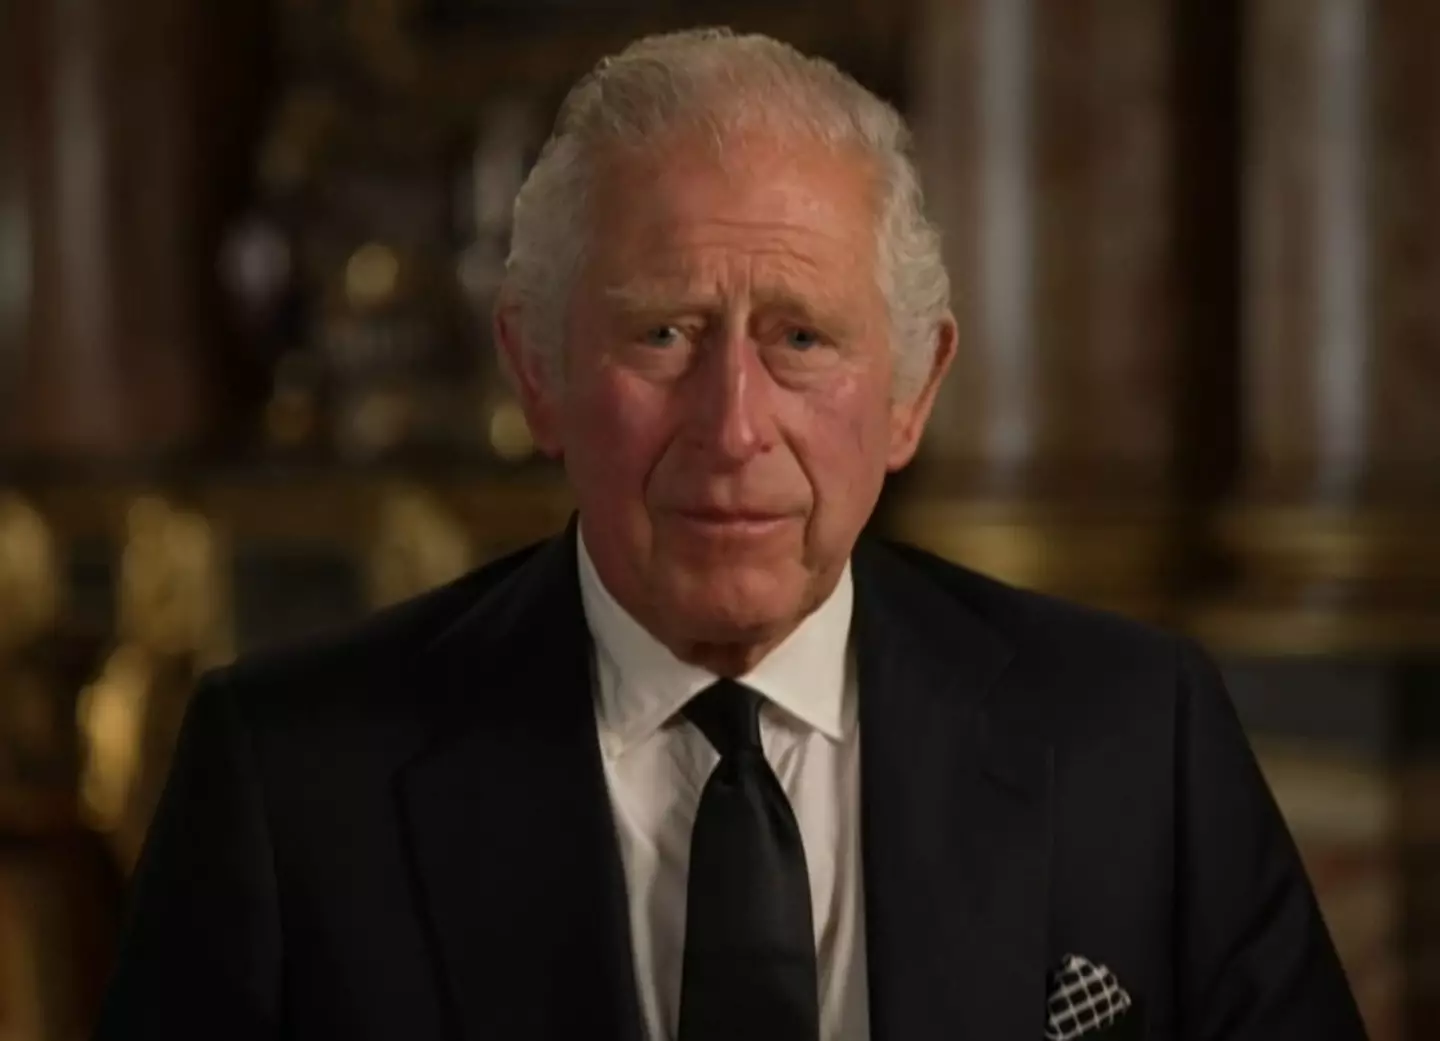 King Charles III addressed the nation for the first time after ascending to the throne.